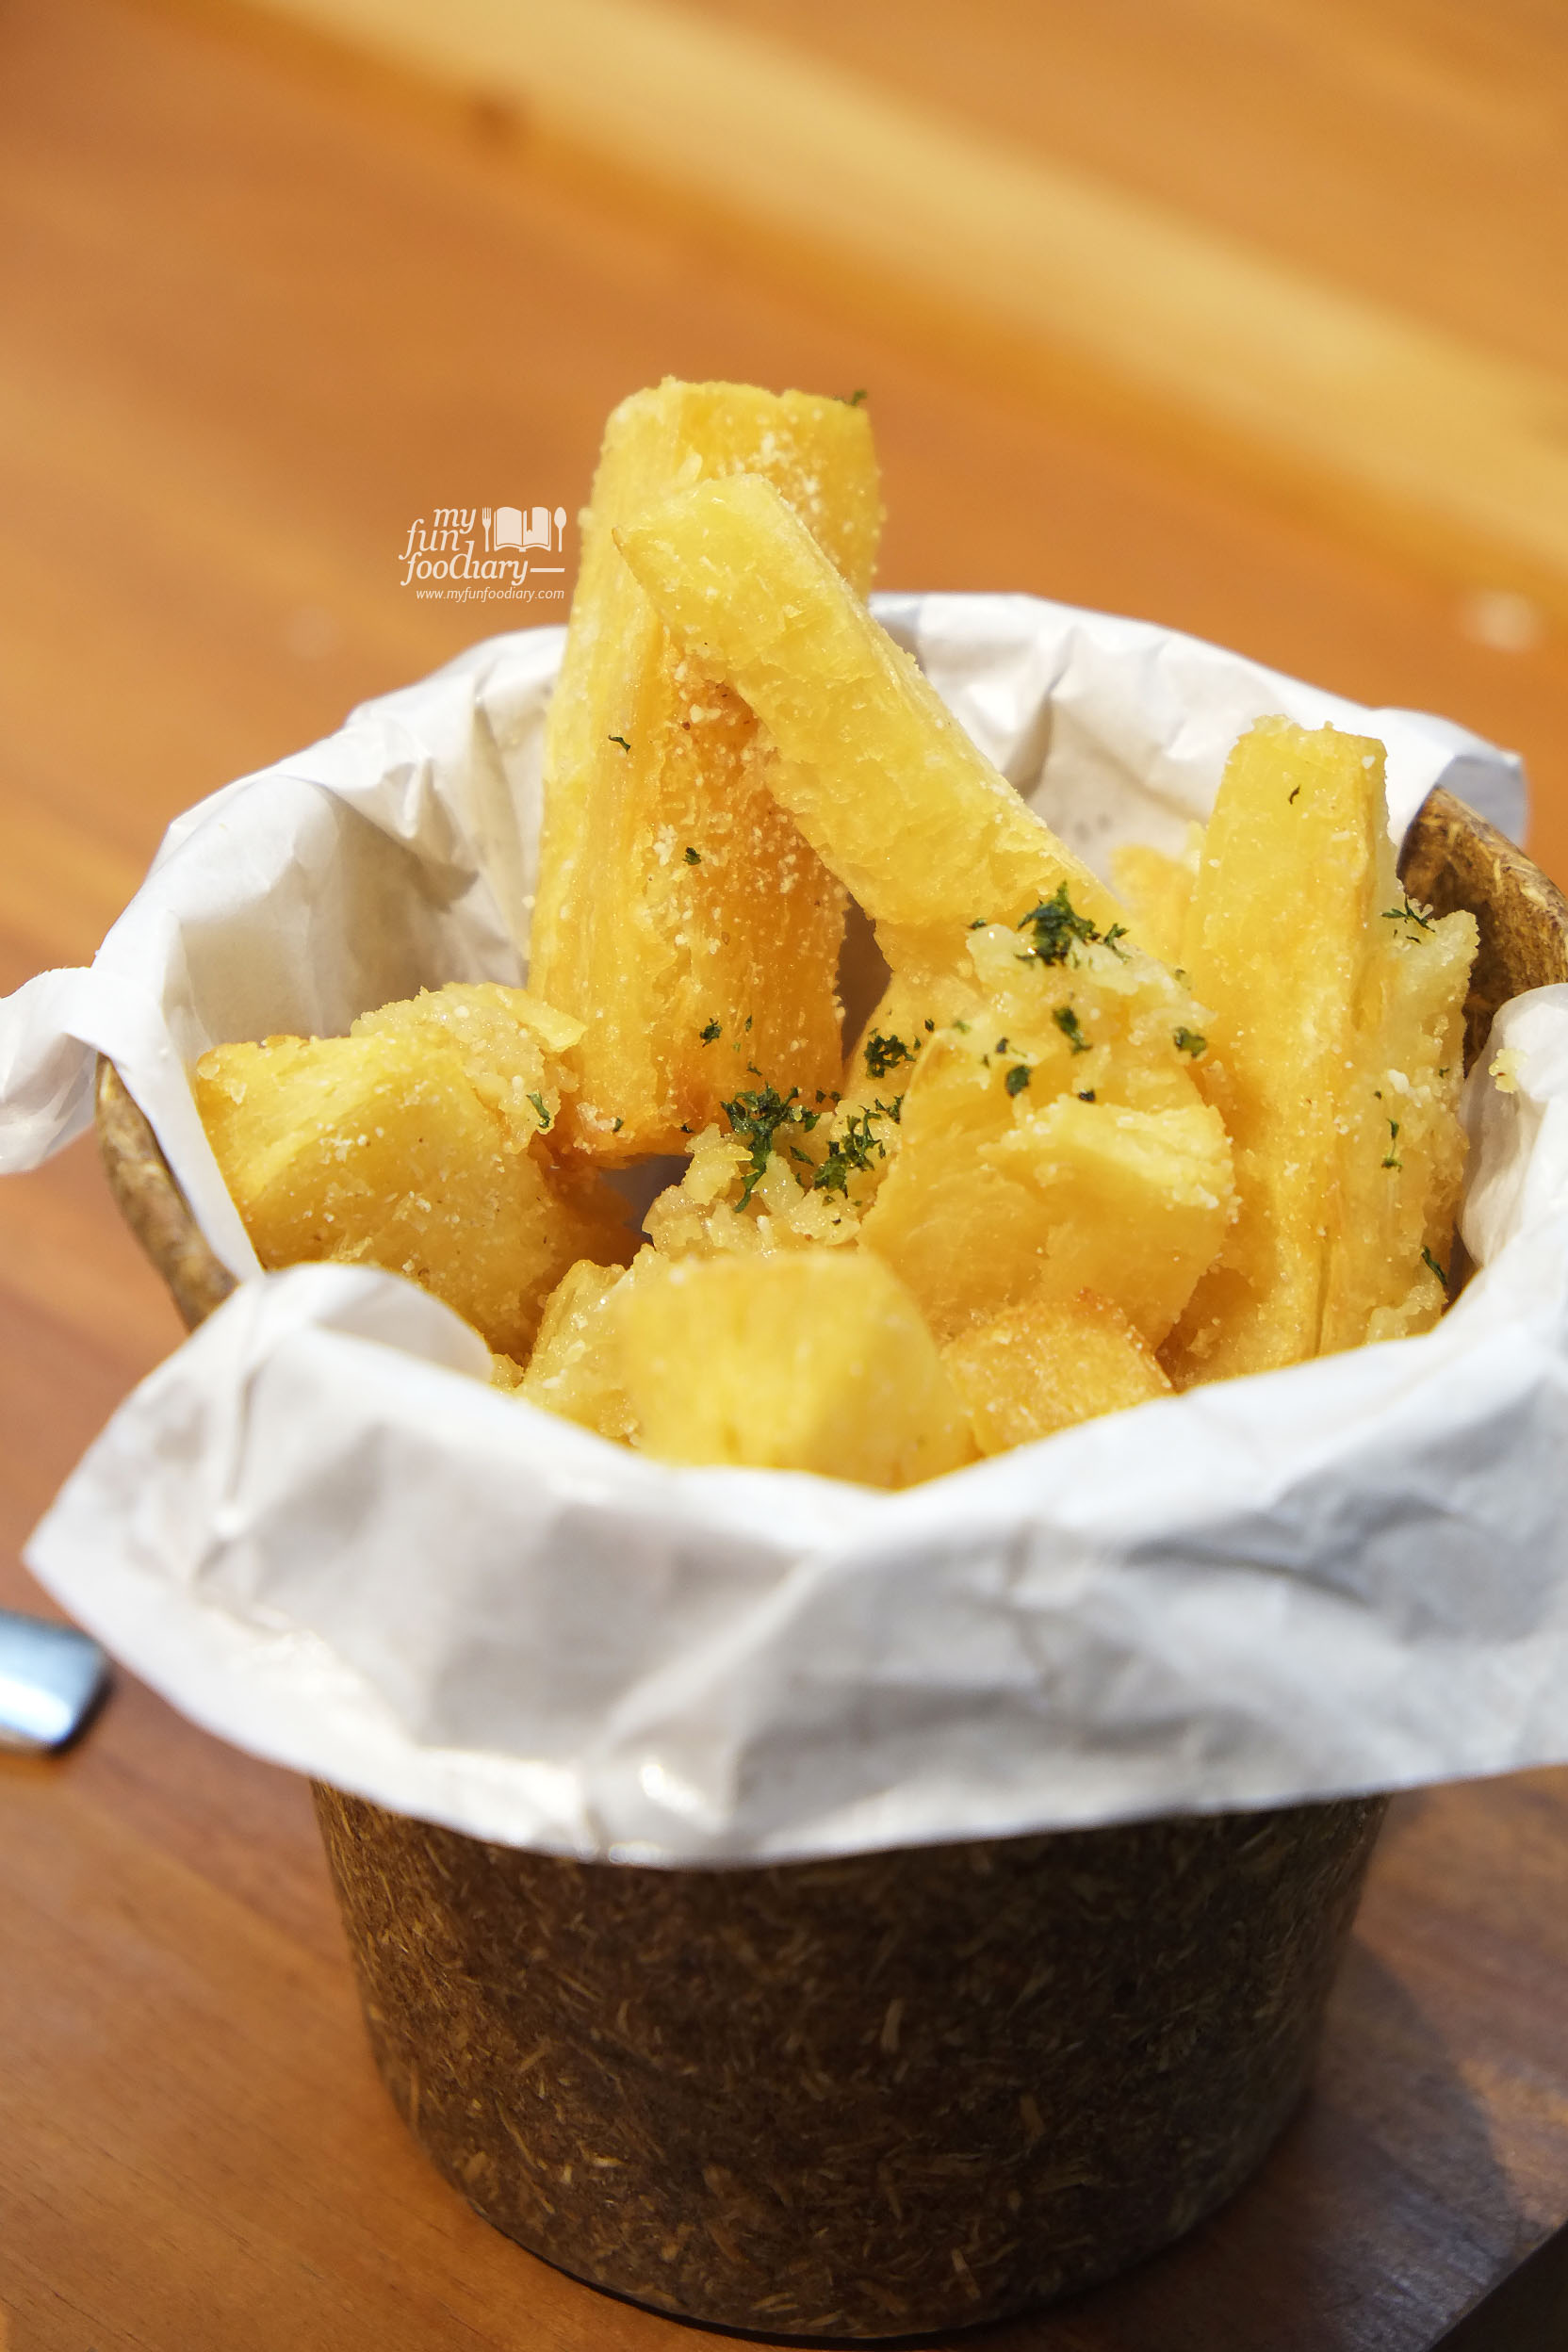 Provencale Singkong Fries at Dill Gourmet by Myfunfoodiary